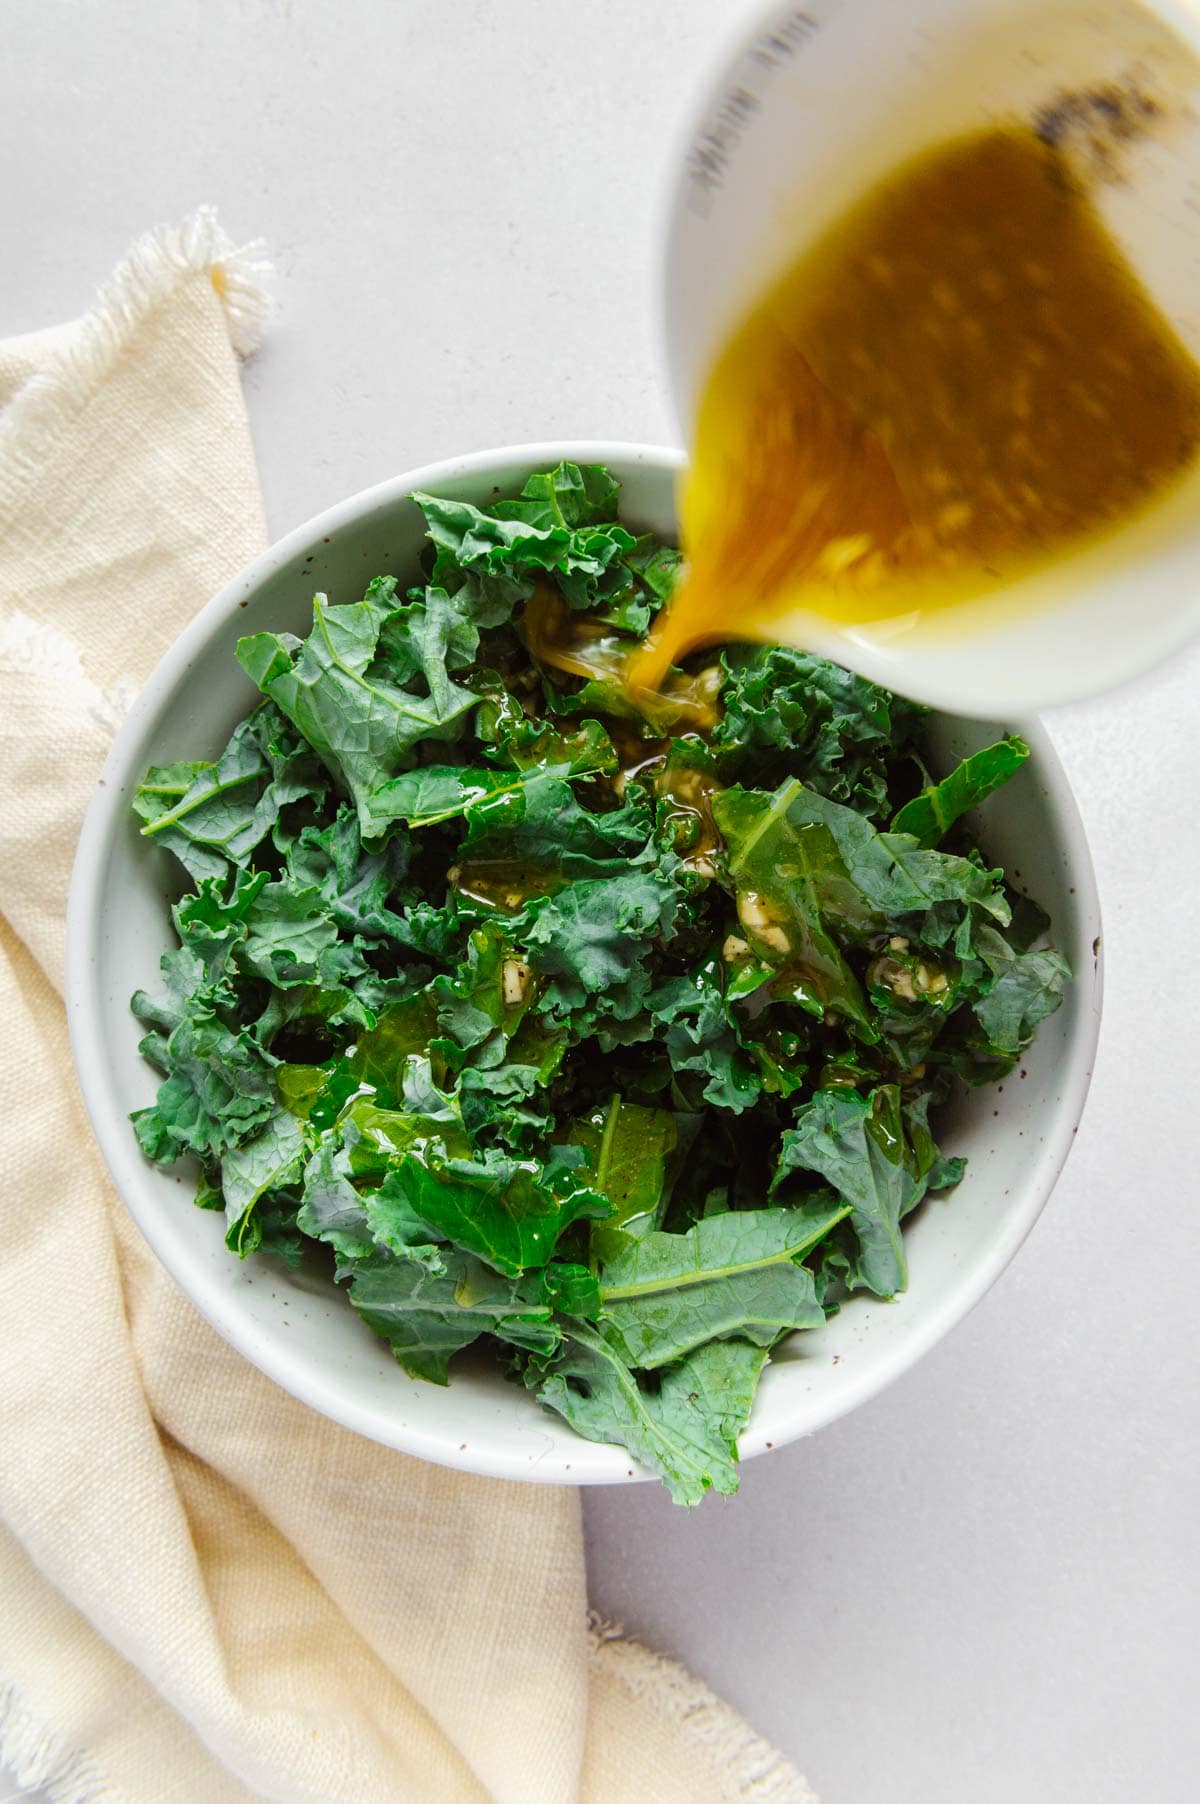 Chopped kale being drizzled with a maple apple cider dressing.